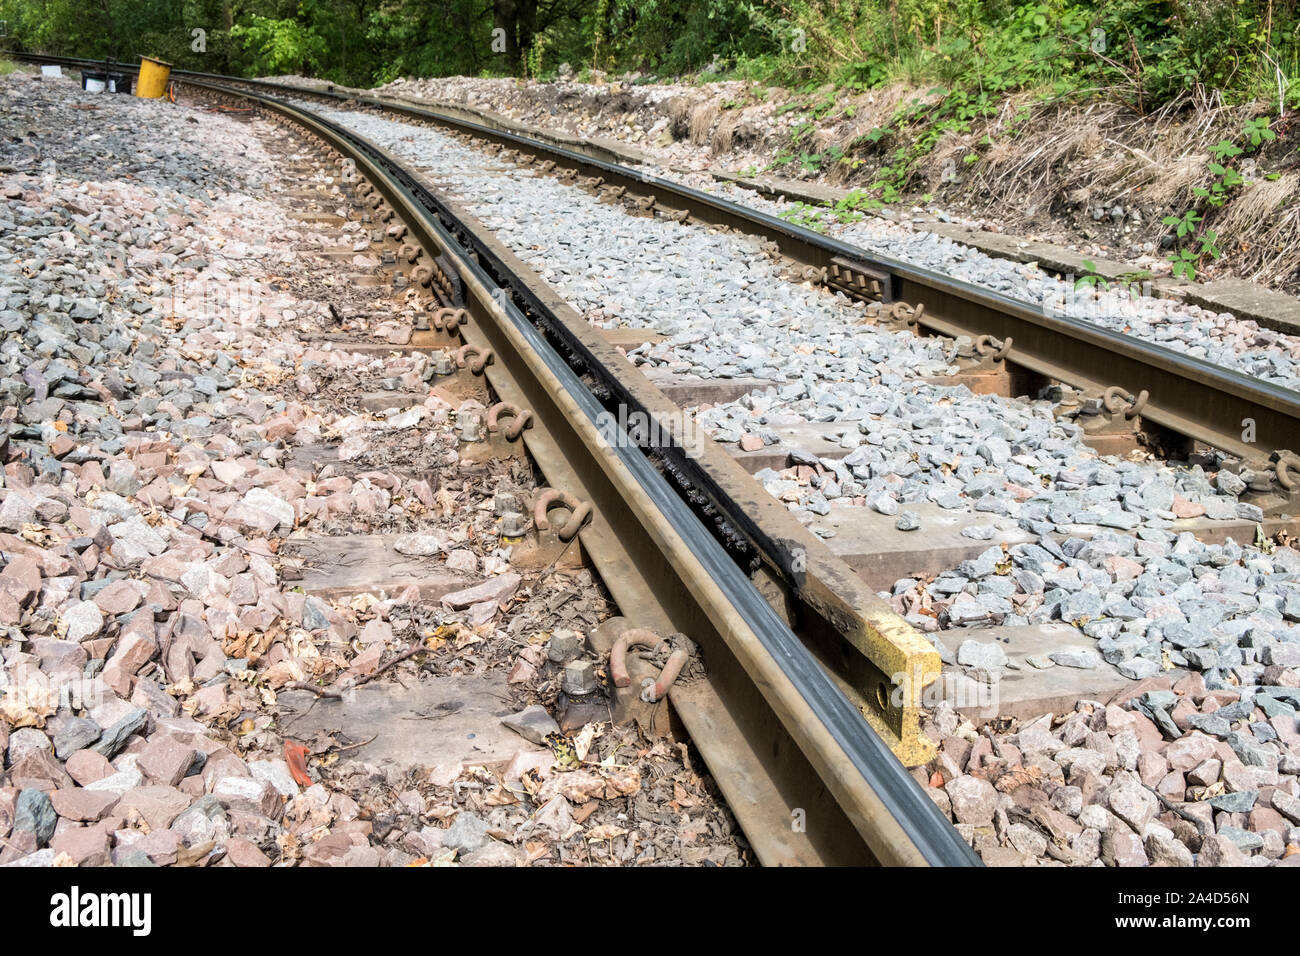 Check rail on the transition curve of a single line railway track, Hope, Derbyshire, England, UK Stock Photo